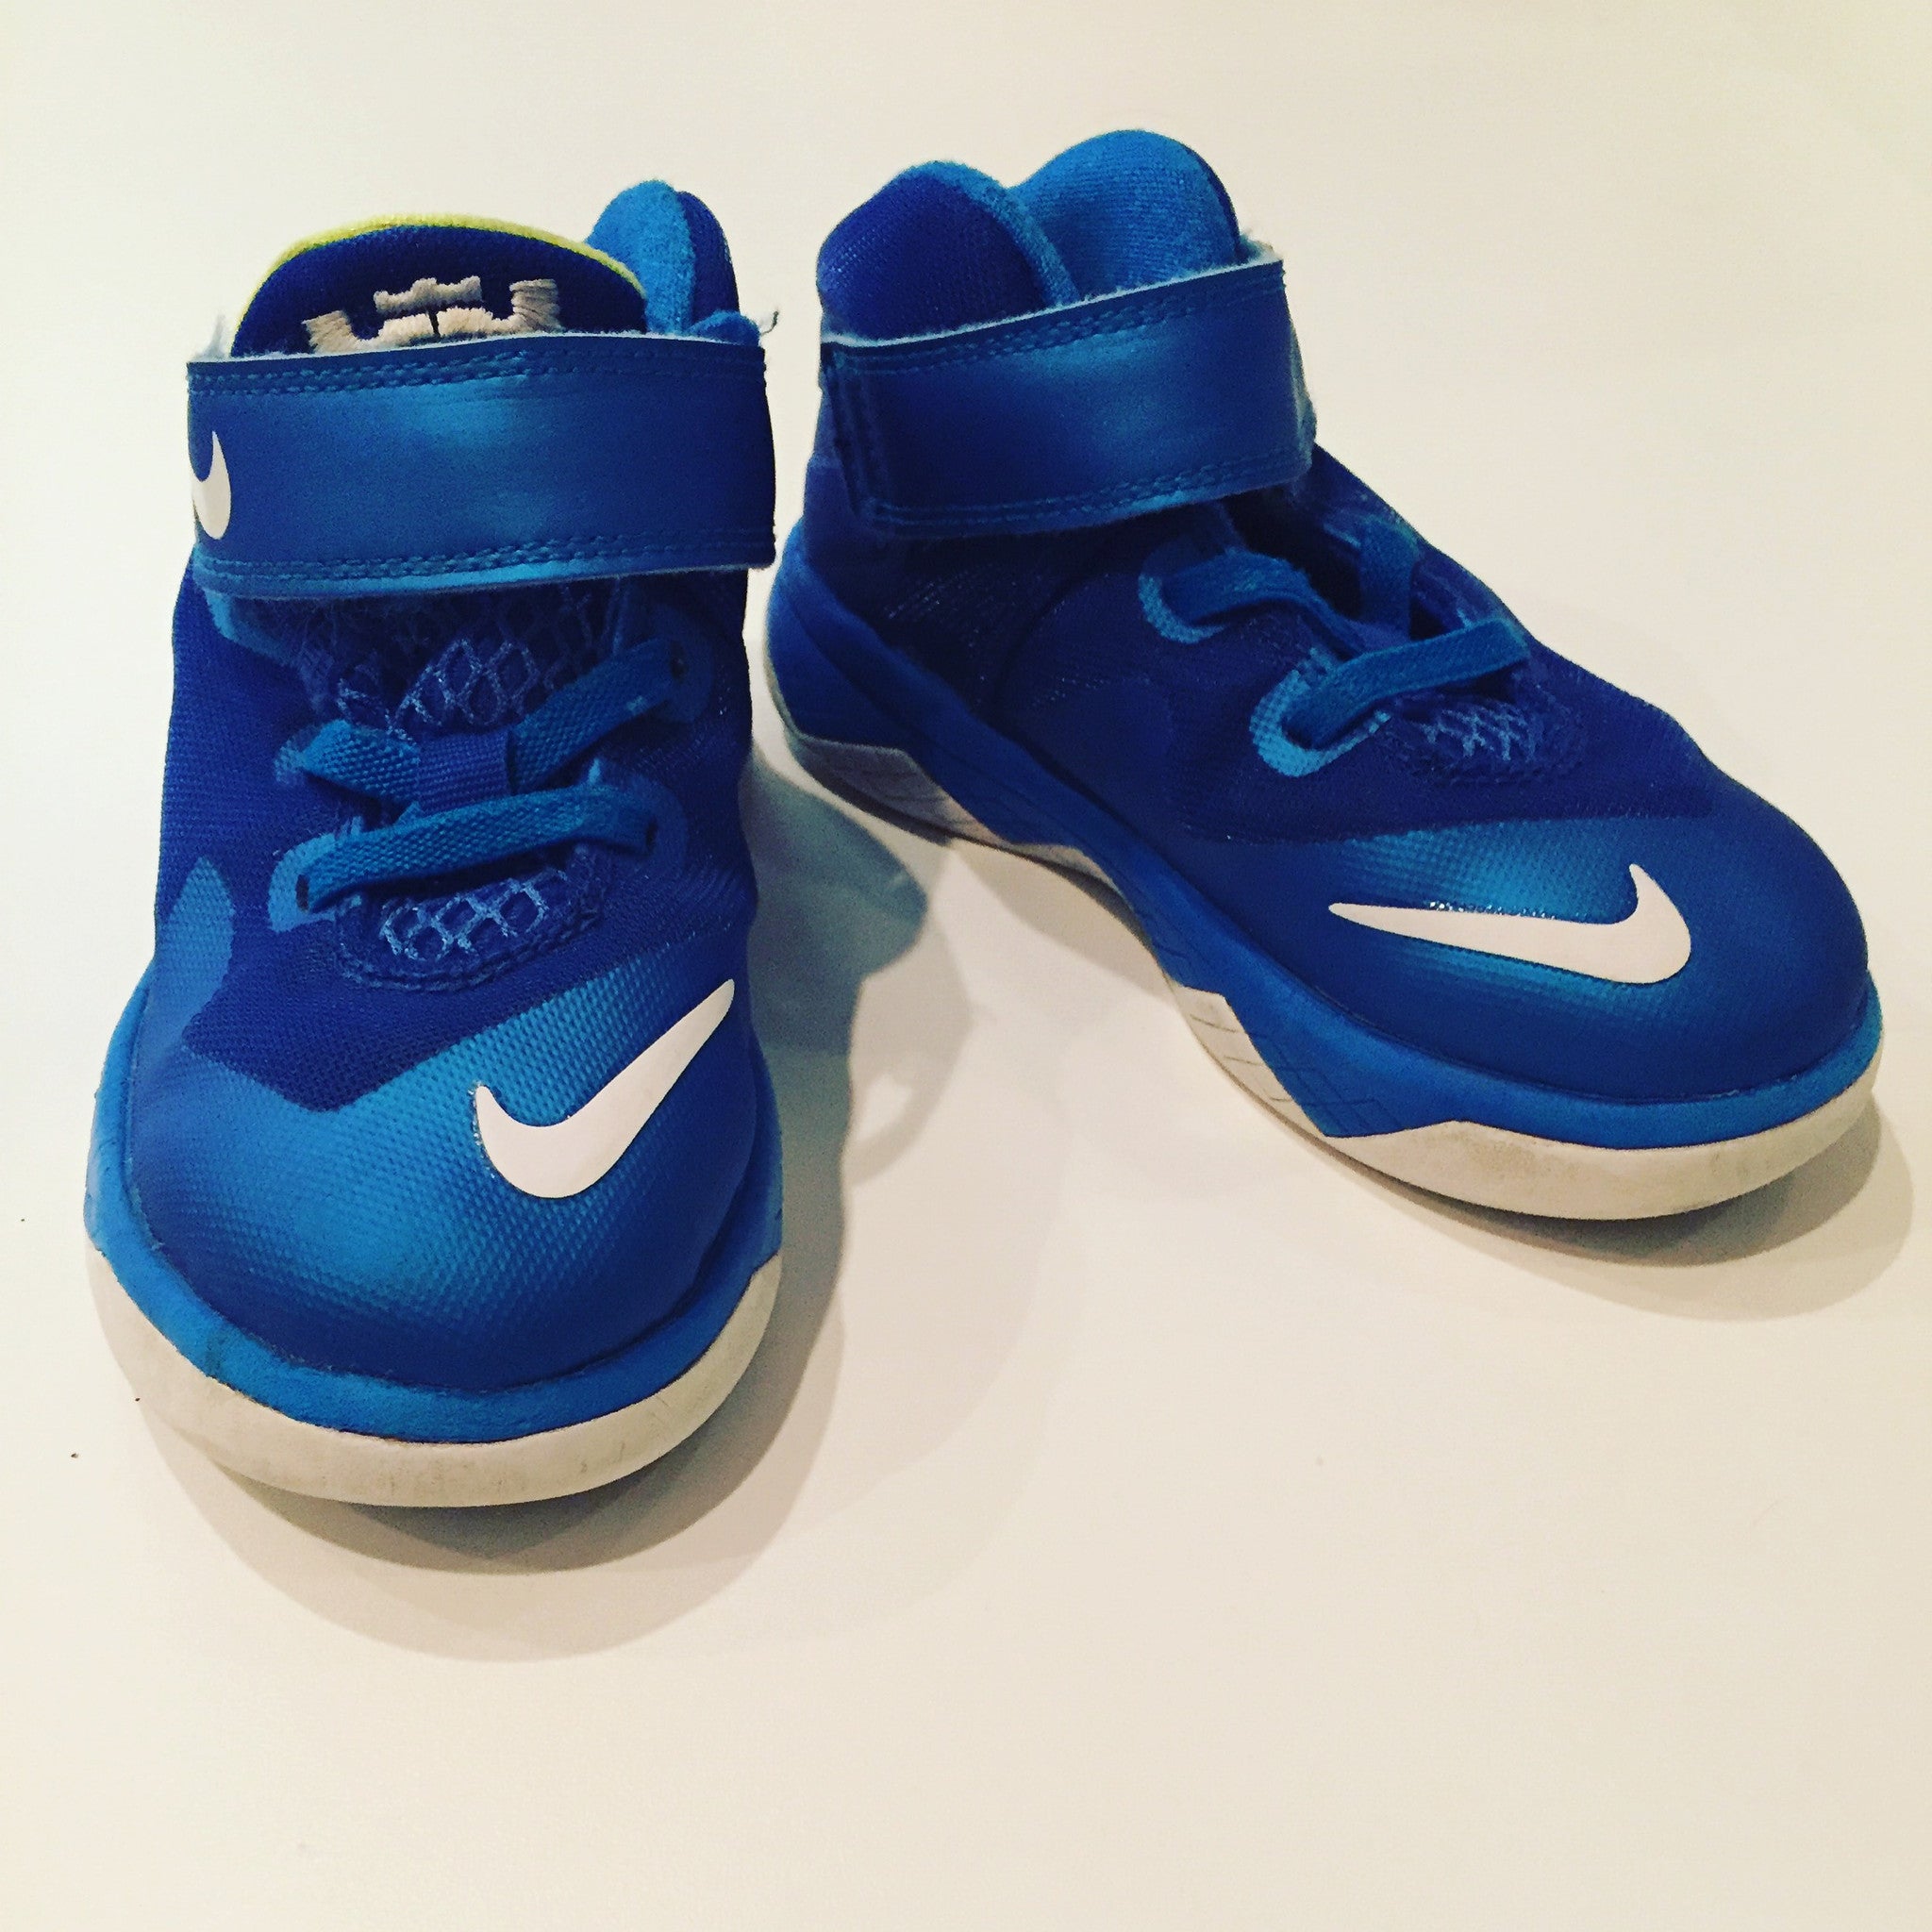 Nike Toddler Boy Electric Blue Shoes 